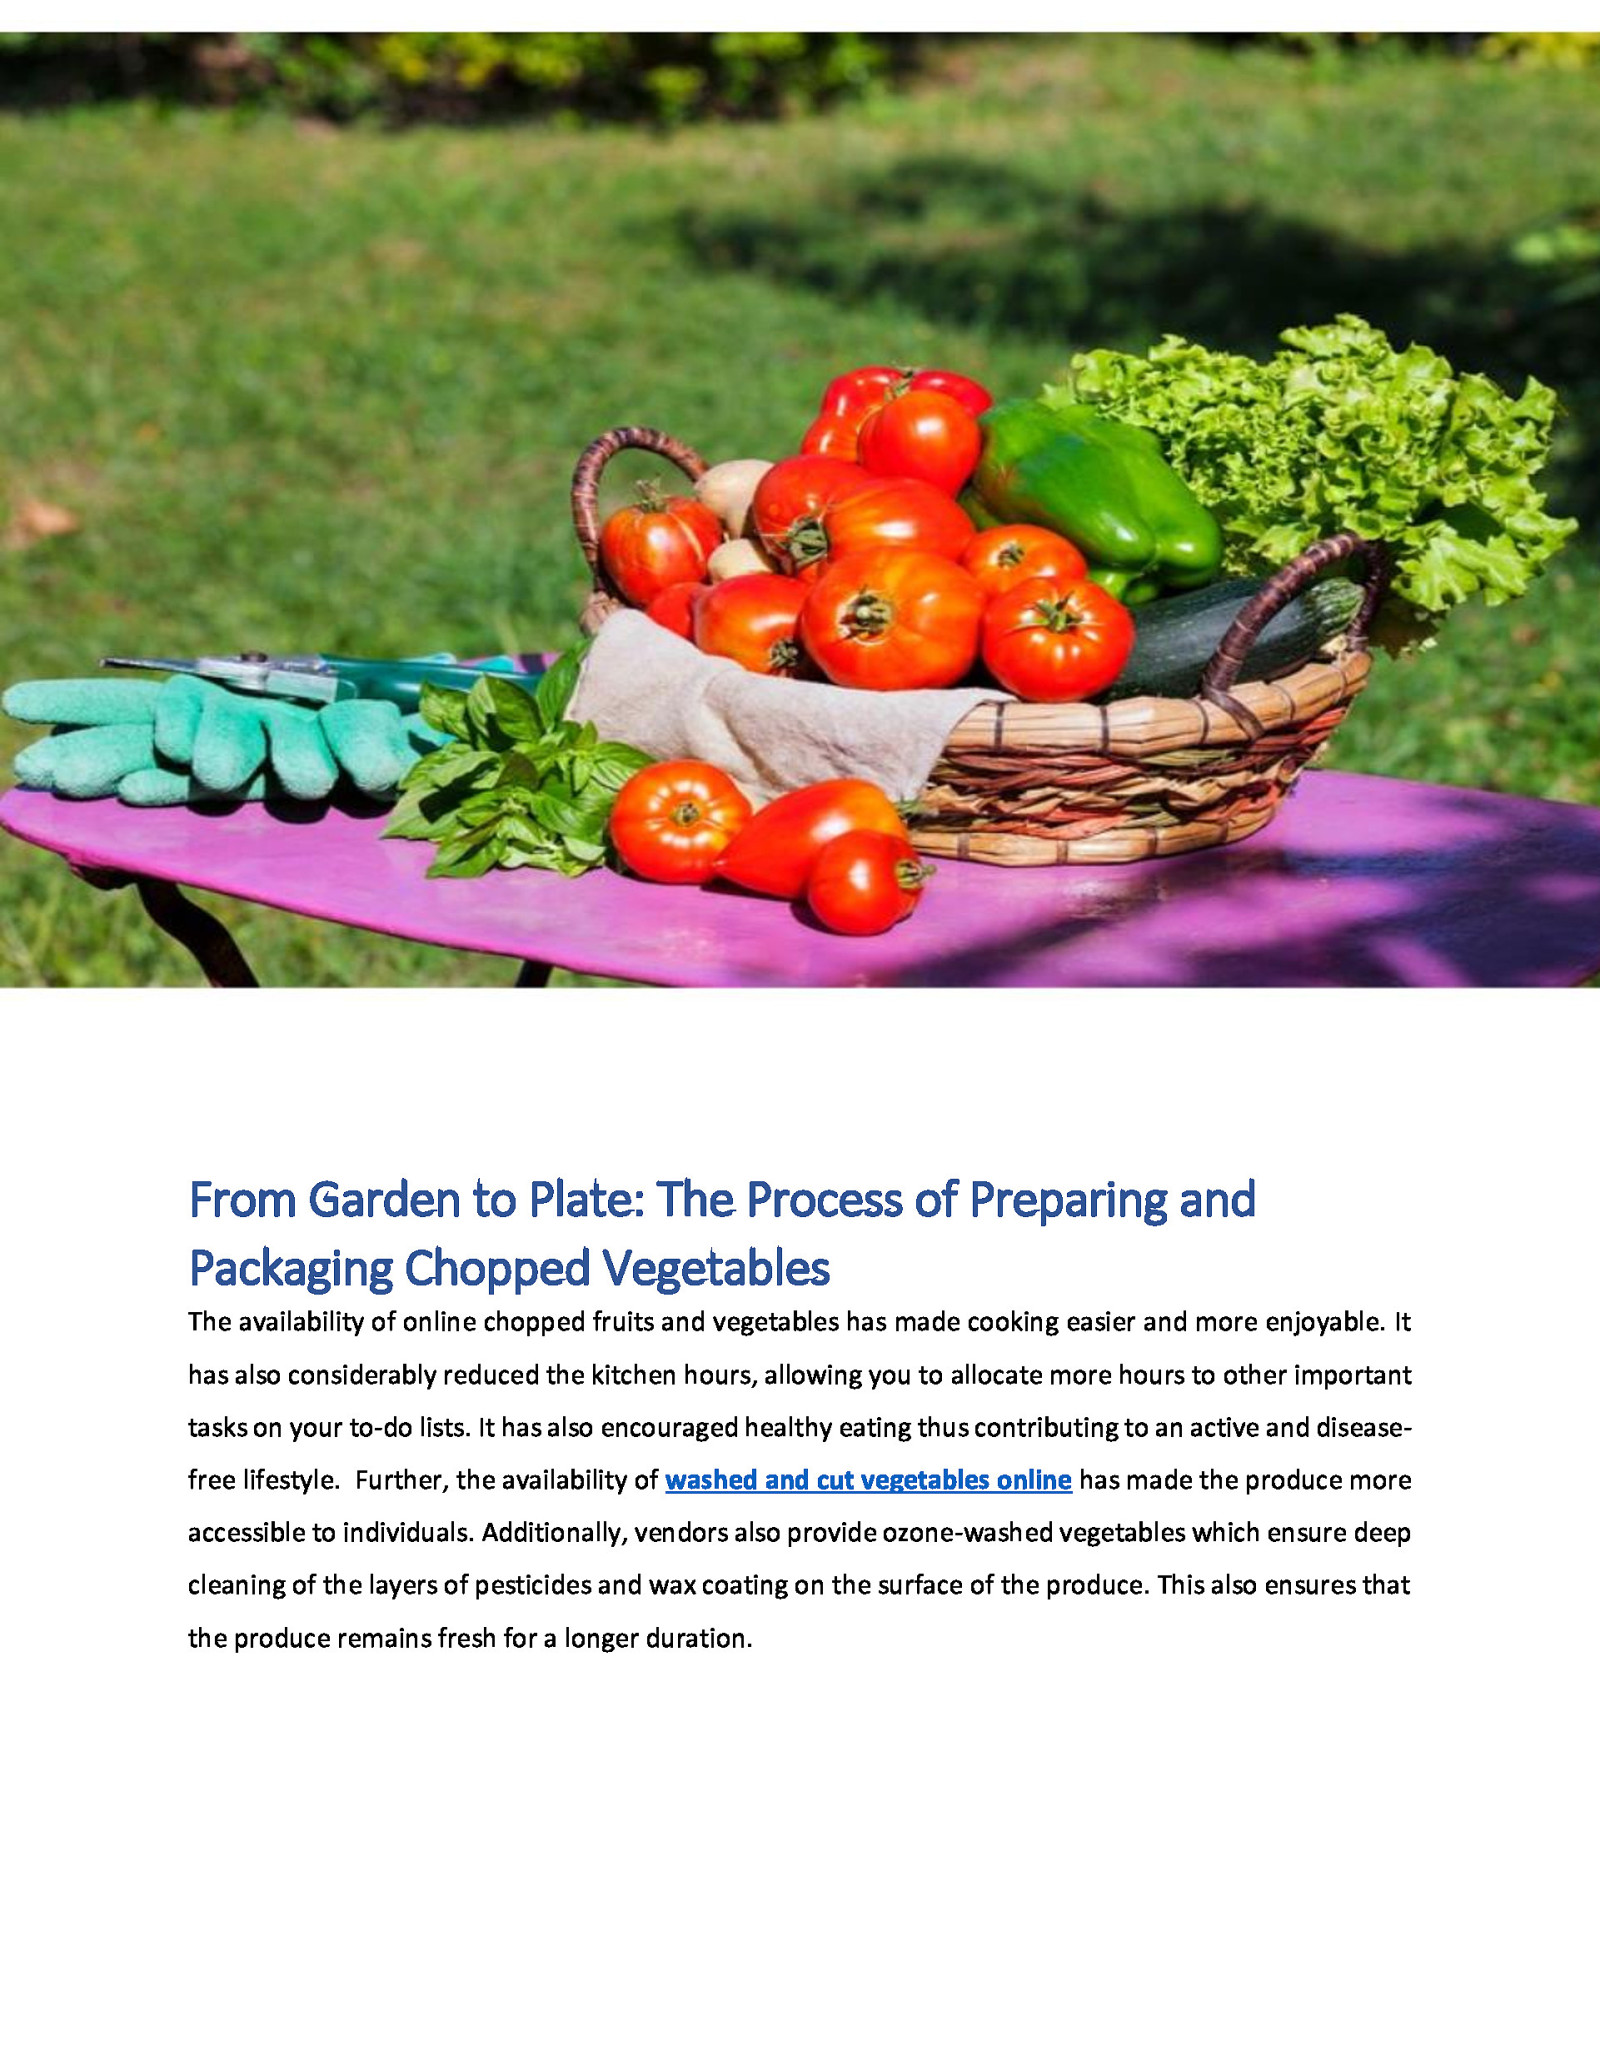 From Garden to Plate: The Process of Preparing and Packaging Chopped Vegetables